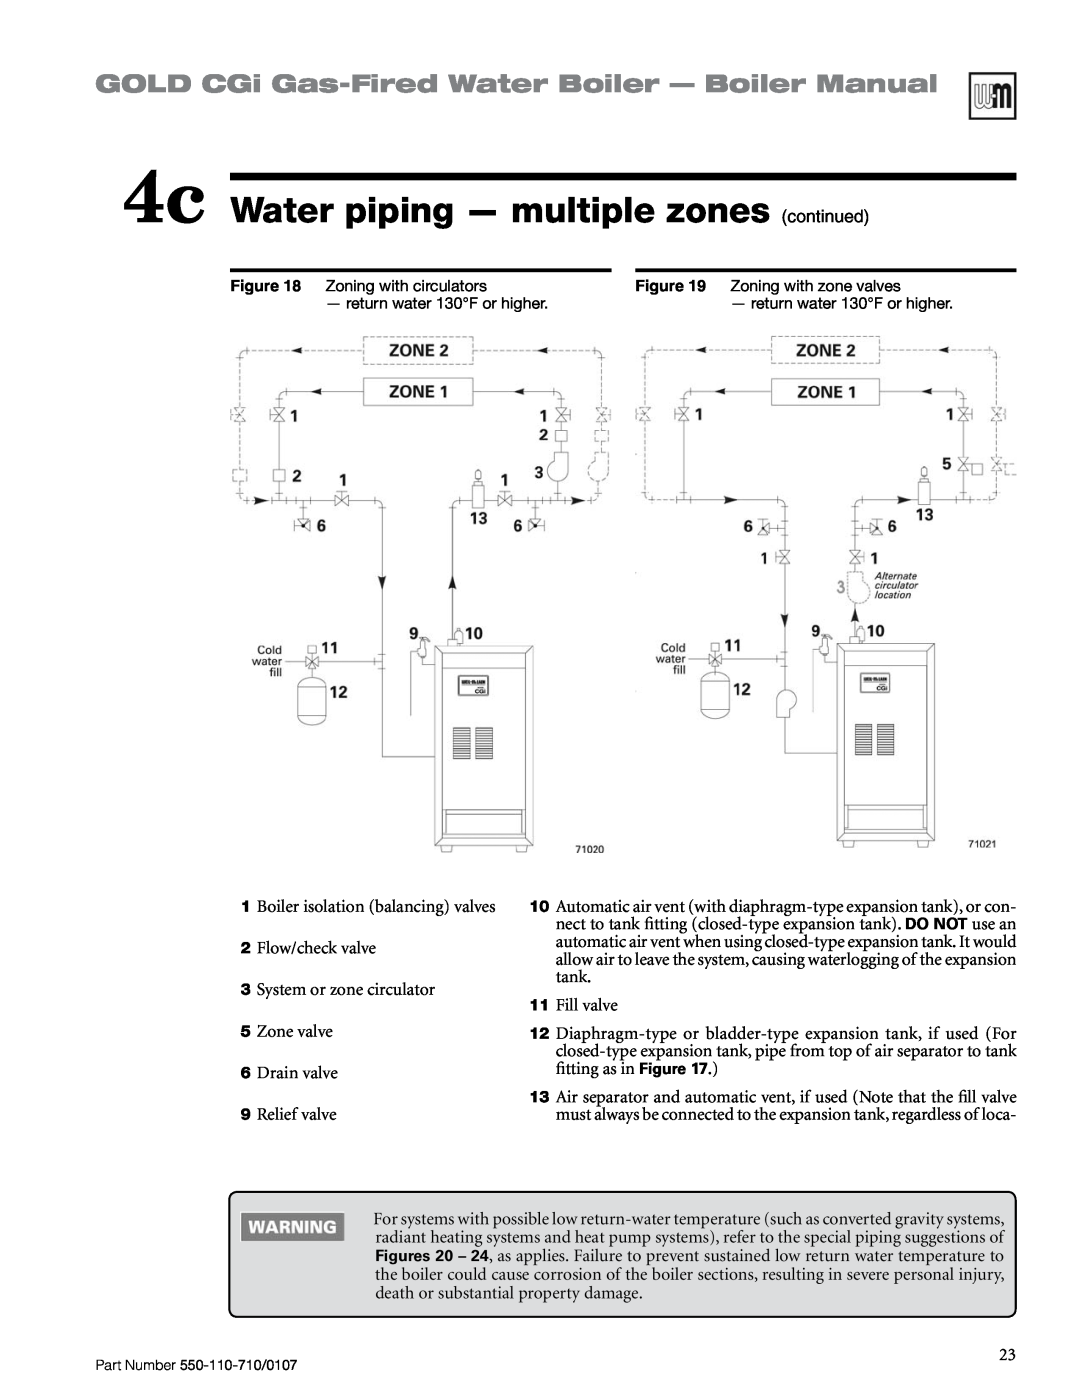 Weil-McLain Series 2 manual 4c Water piping — multiple zones continued, GOLD CGi Gas-FiredWater Boiler — Boiler Manual 